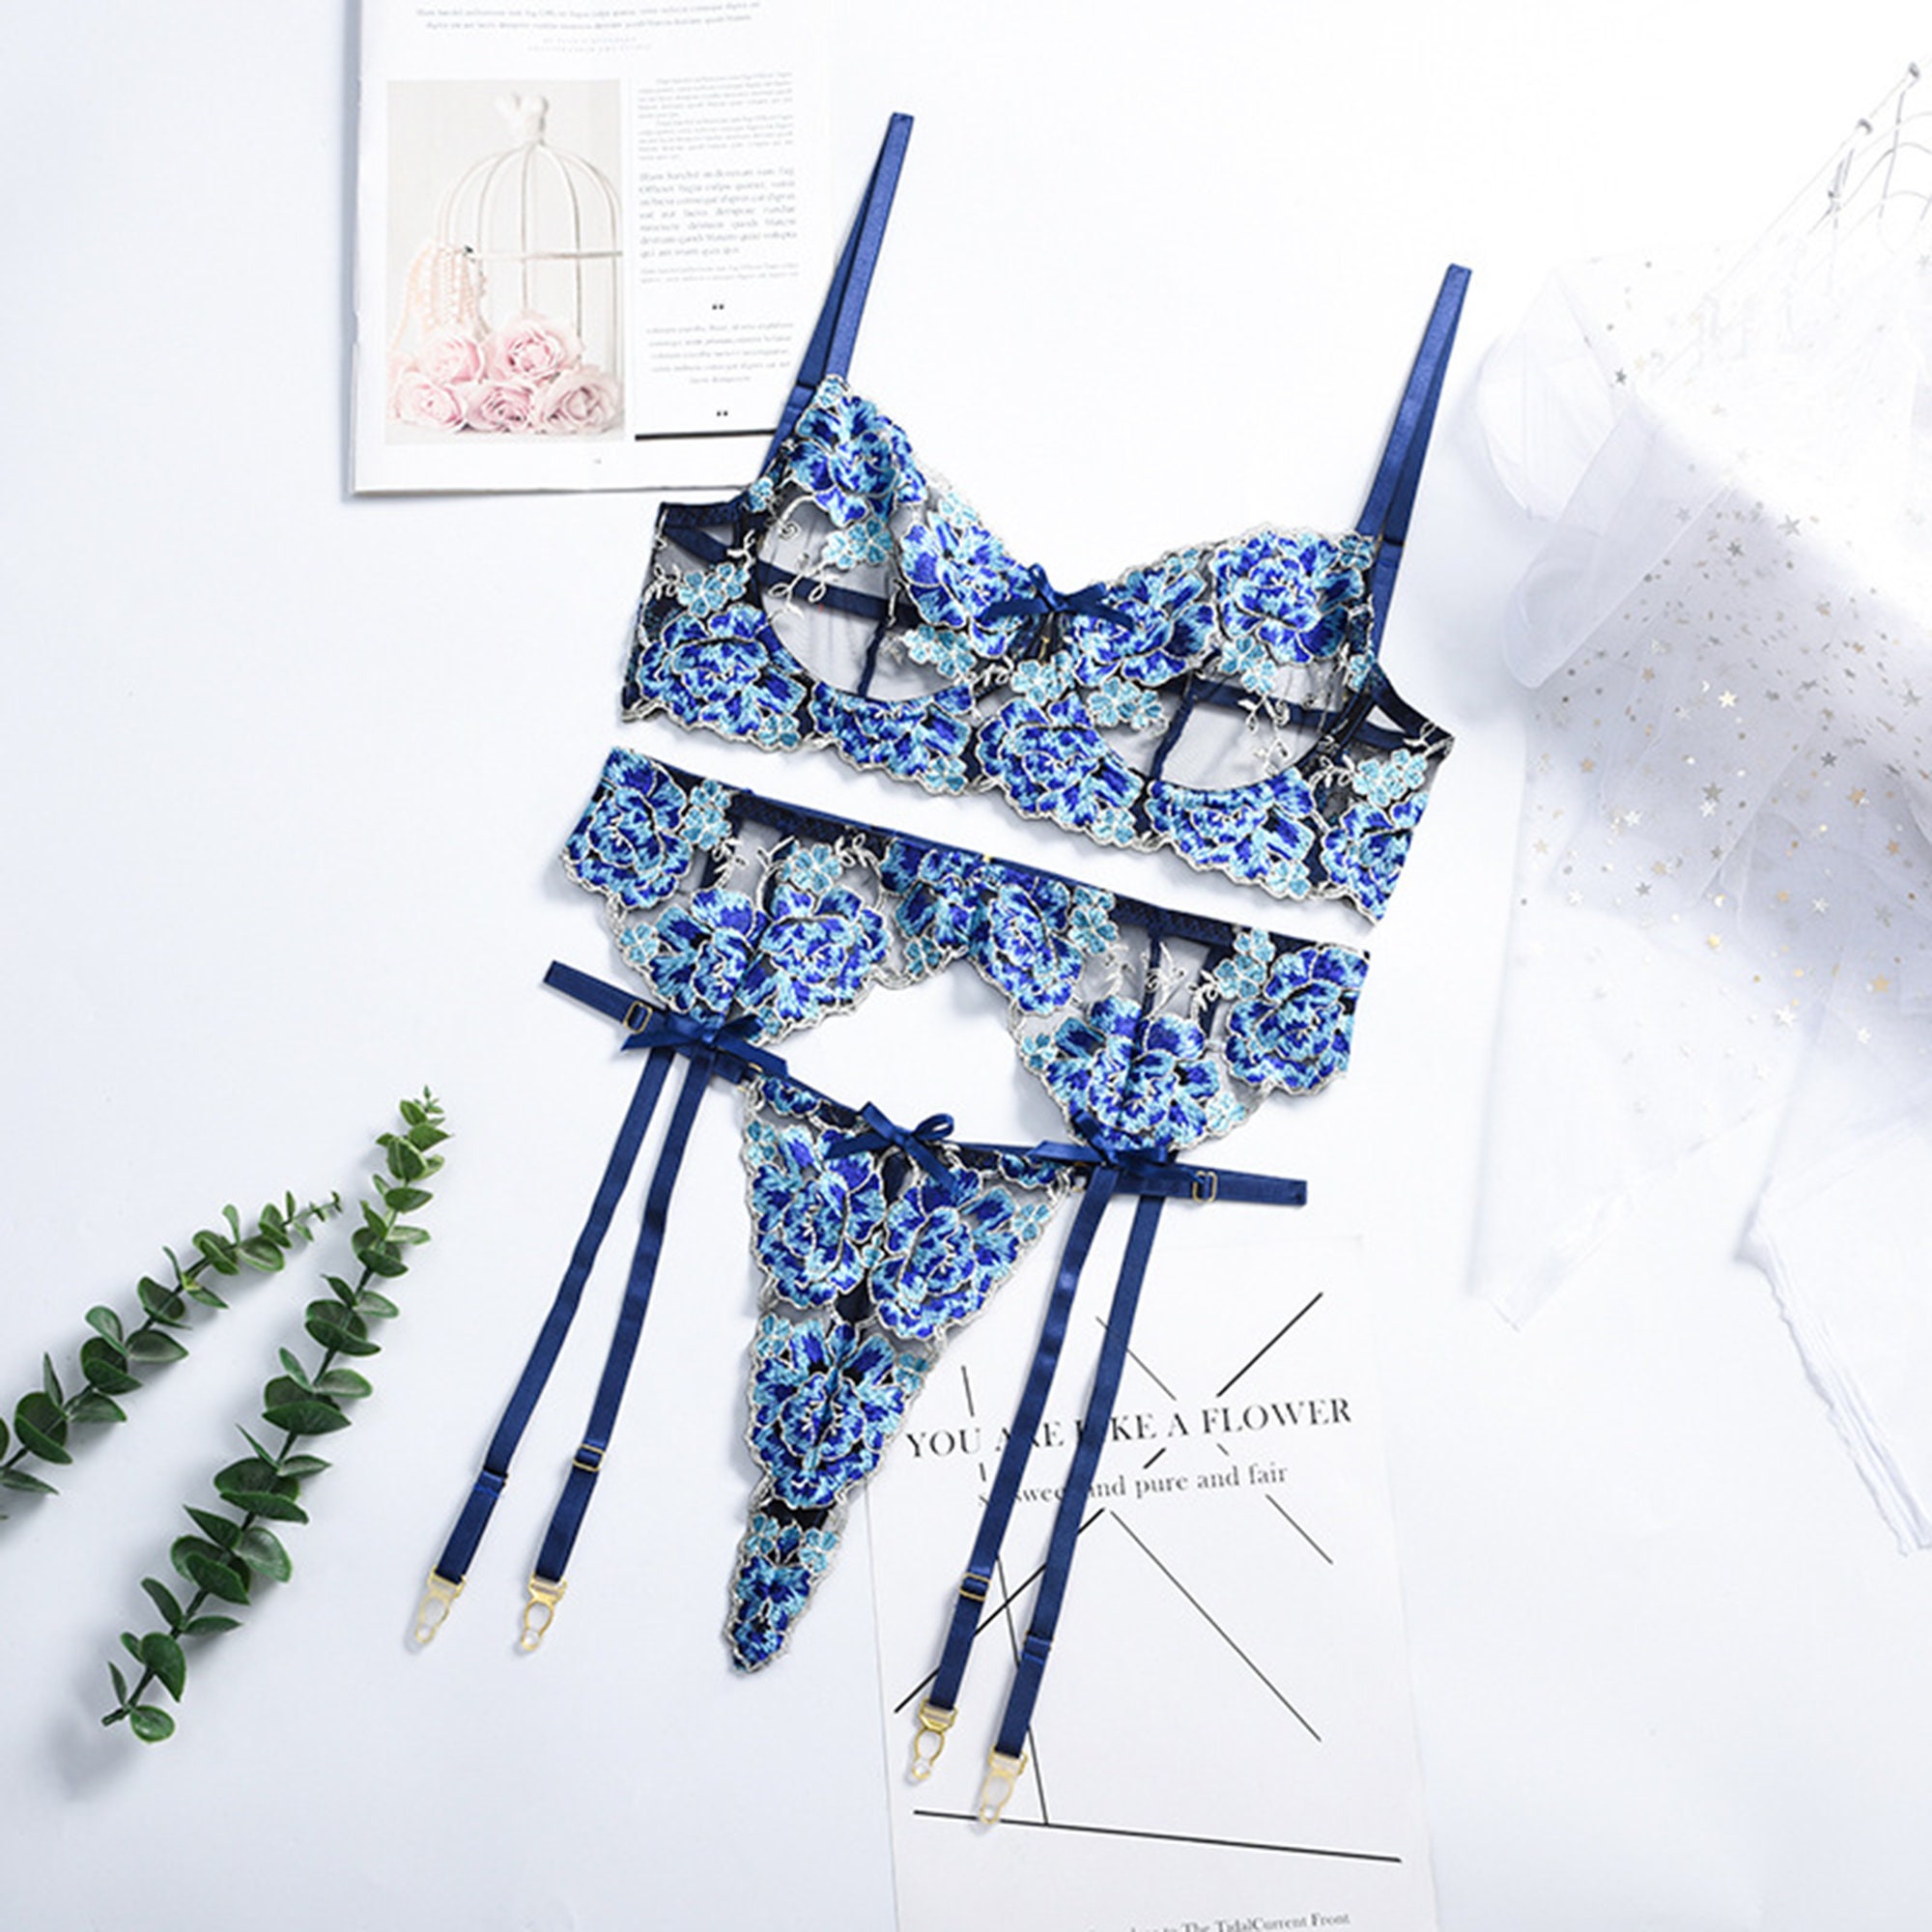 BLUE LINGERIE SET Sexy 3pc. Bra, Grarter Belt, Panty Lingerie Set With  Sensual Mesh Lace Erotic, Elegant Lingerie Gift for Her, Him or You -   Canada